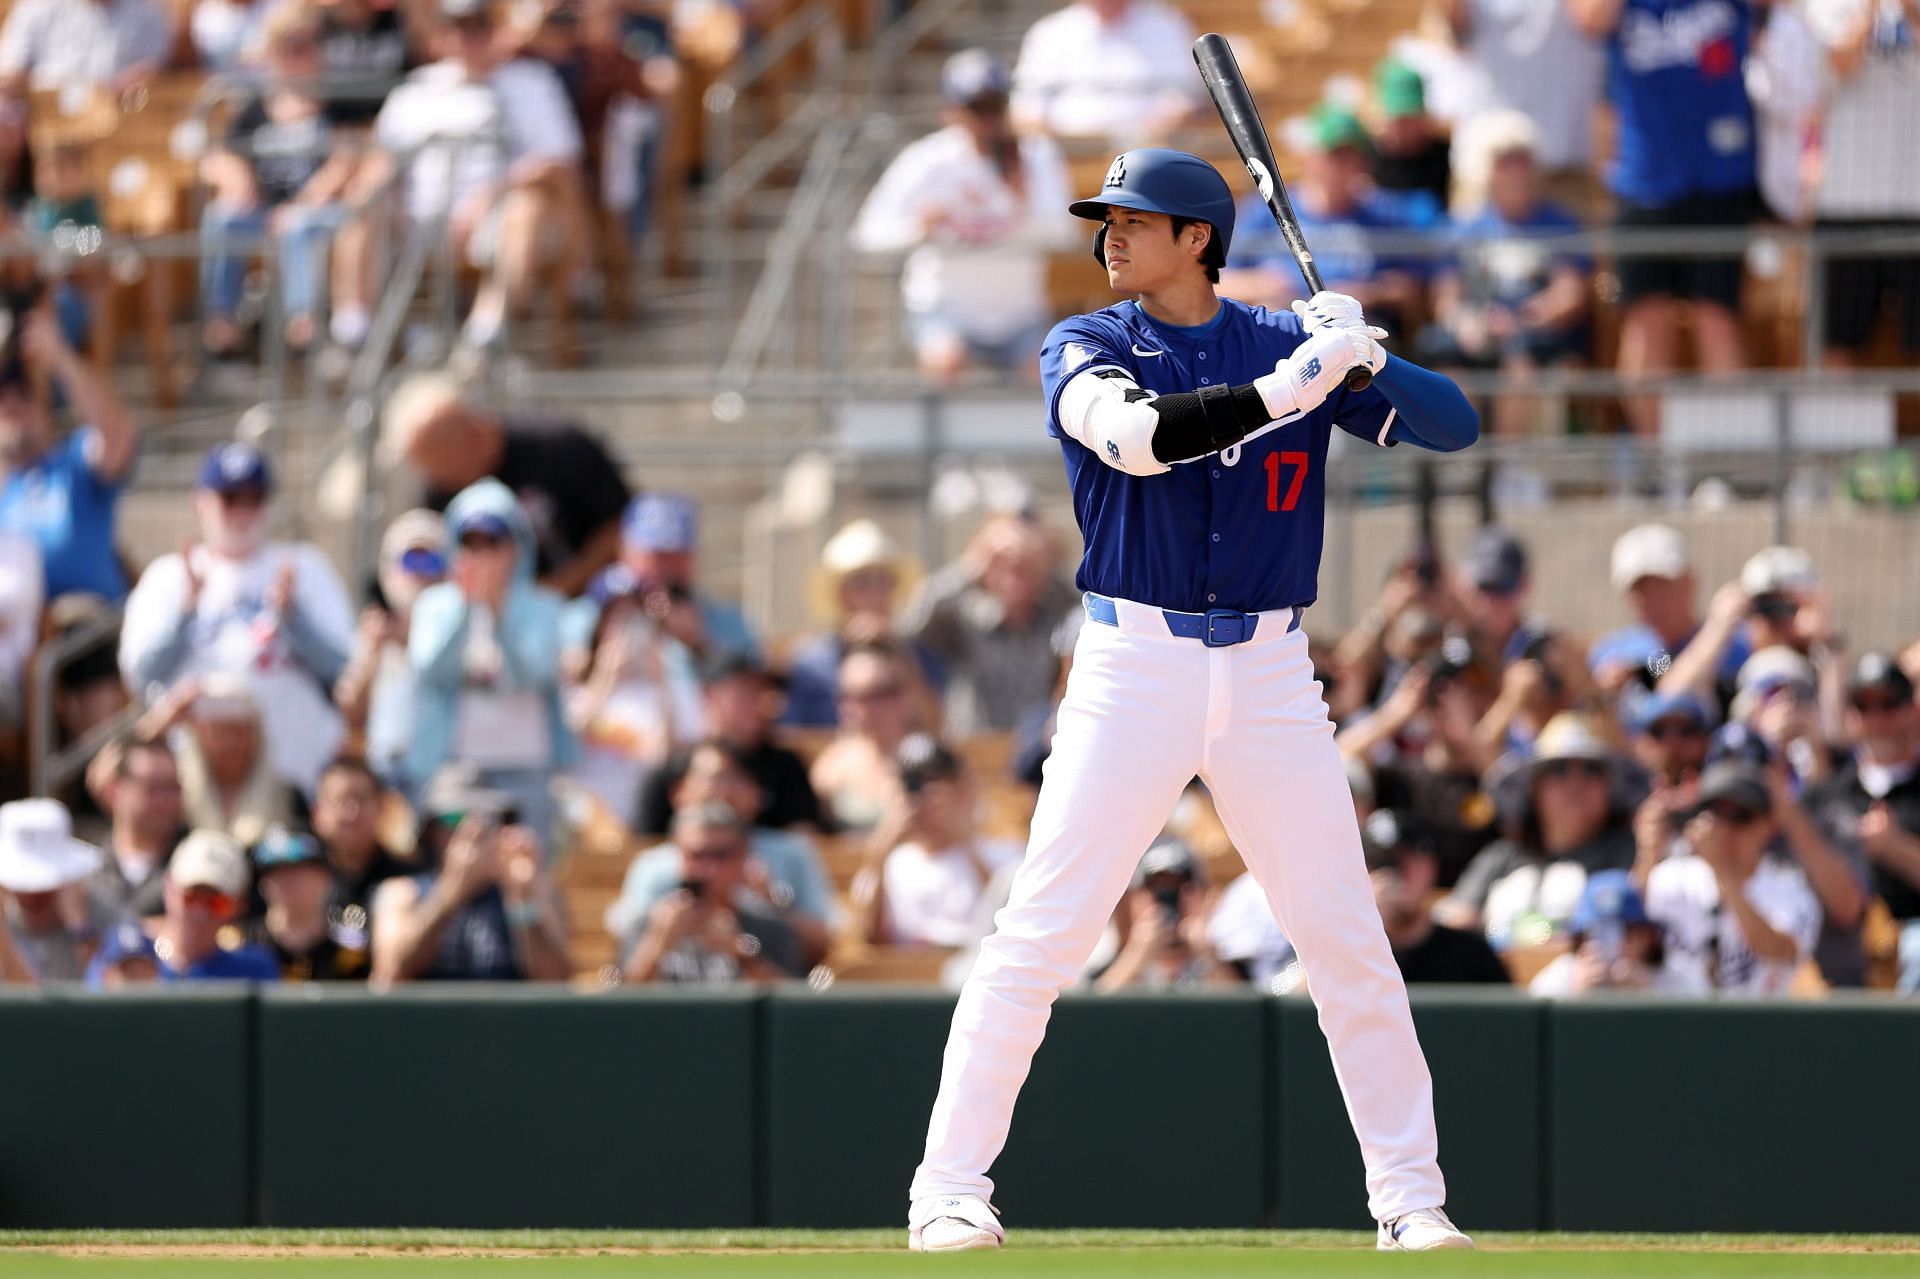 News on Shohei Ohtani&rsquo;s marriage caused a social media frenzy, both in Japan and all around the baseball world.